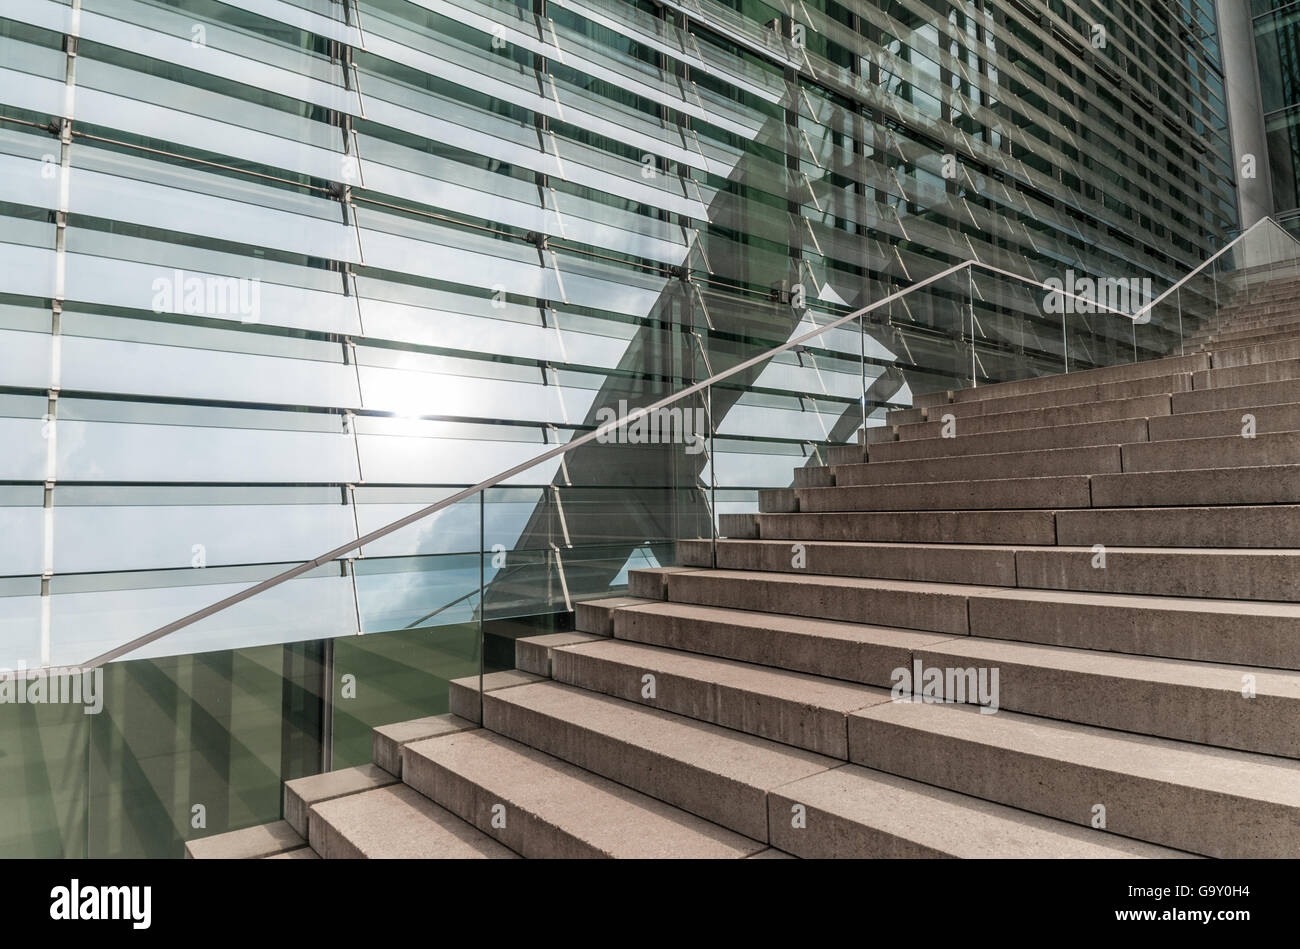 Stairway of Marie-Elisabeth-Lueders-Haus in the government district of Berlin, Germany. Stock Photo